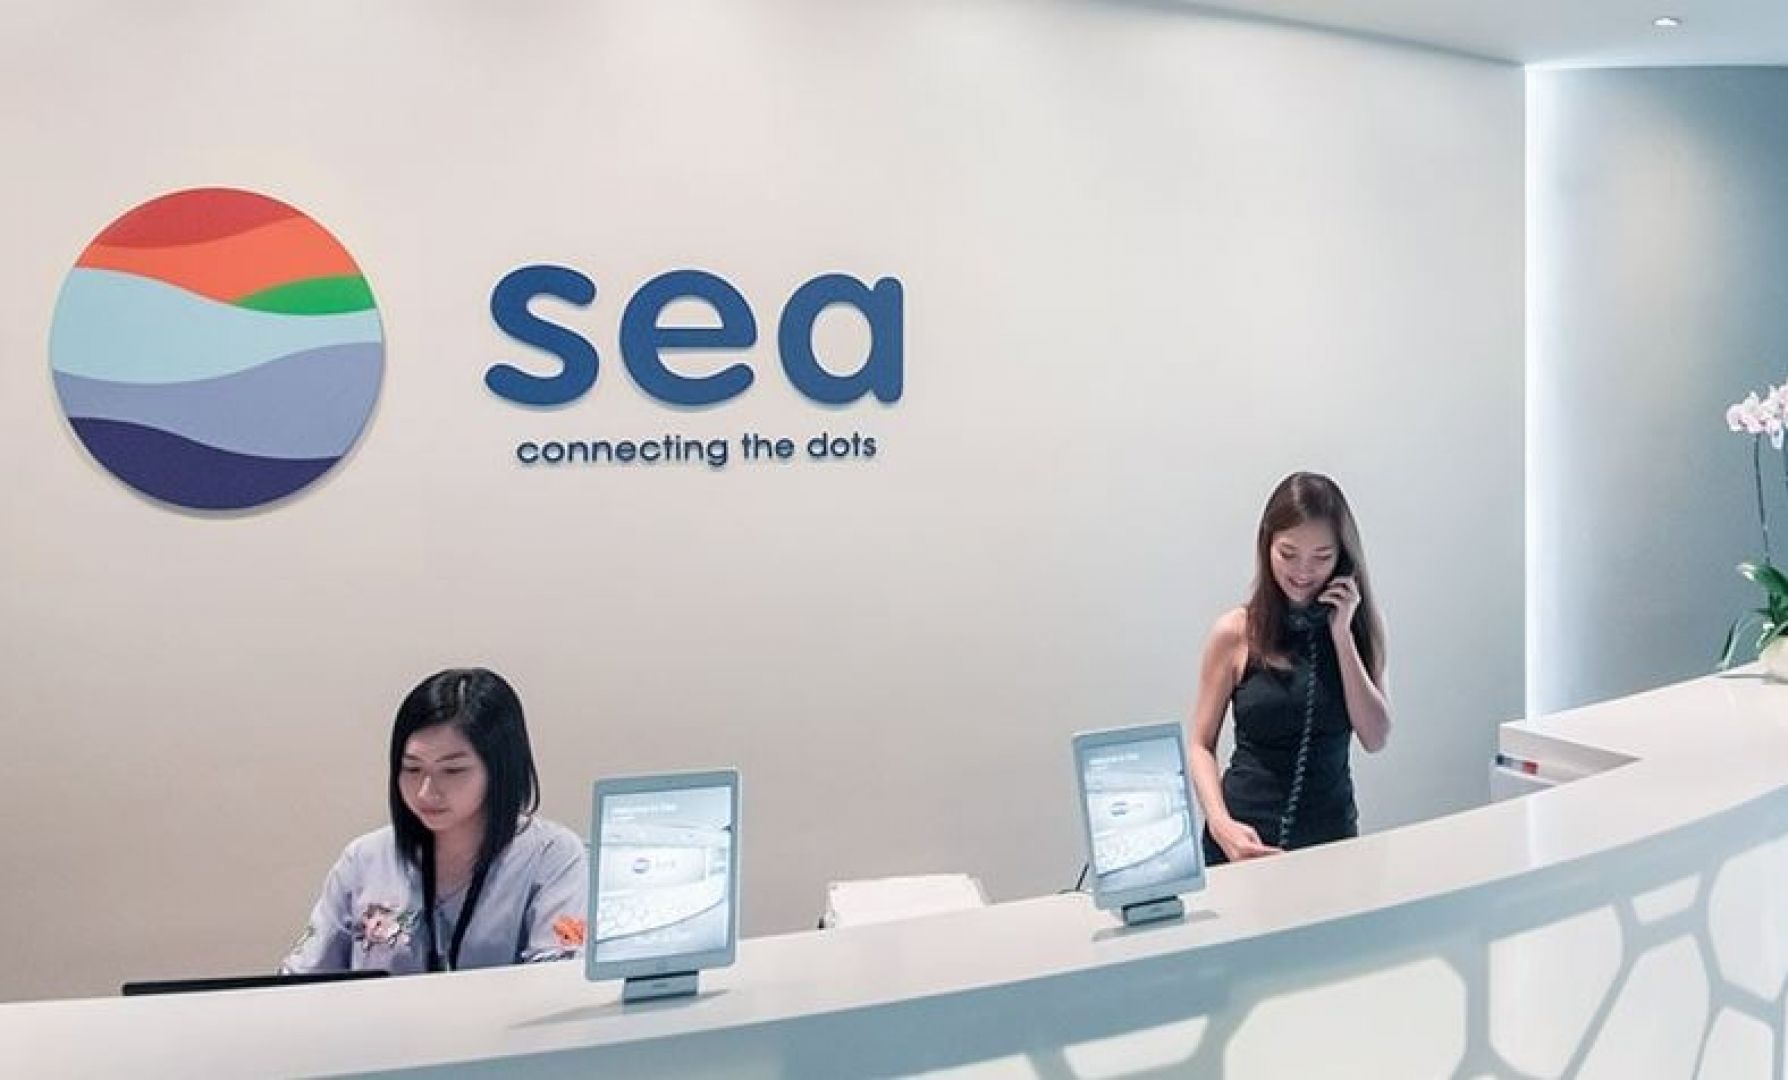 Sea Group eyes LatAm e-commerce in potential battle royale against incumbents